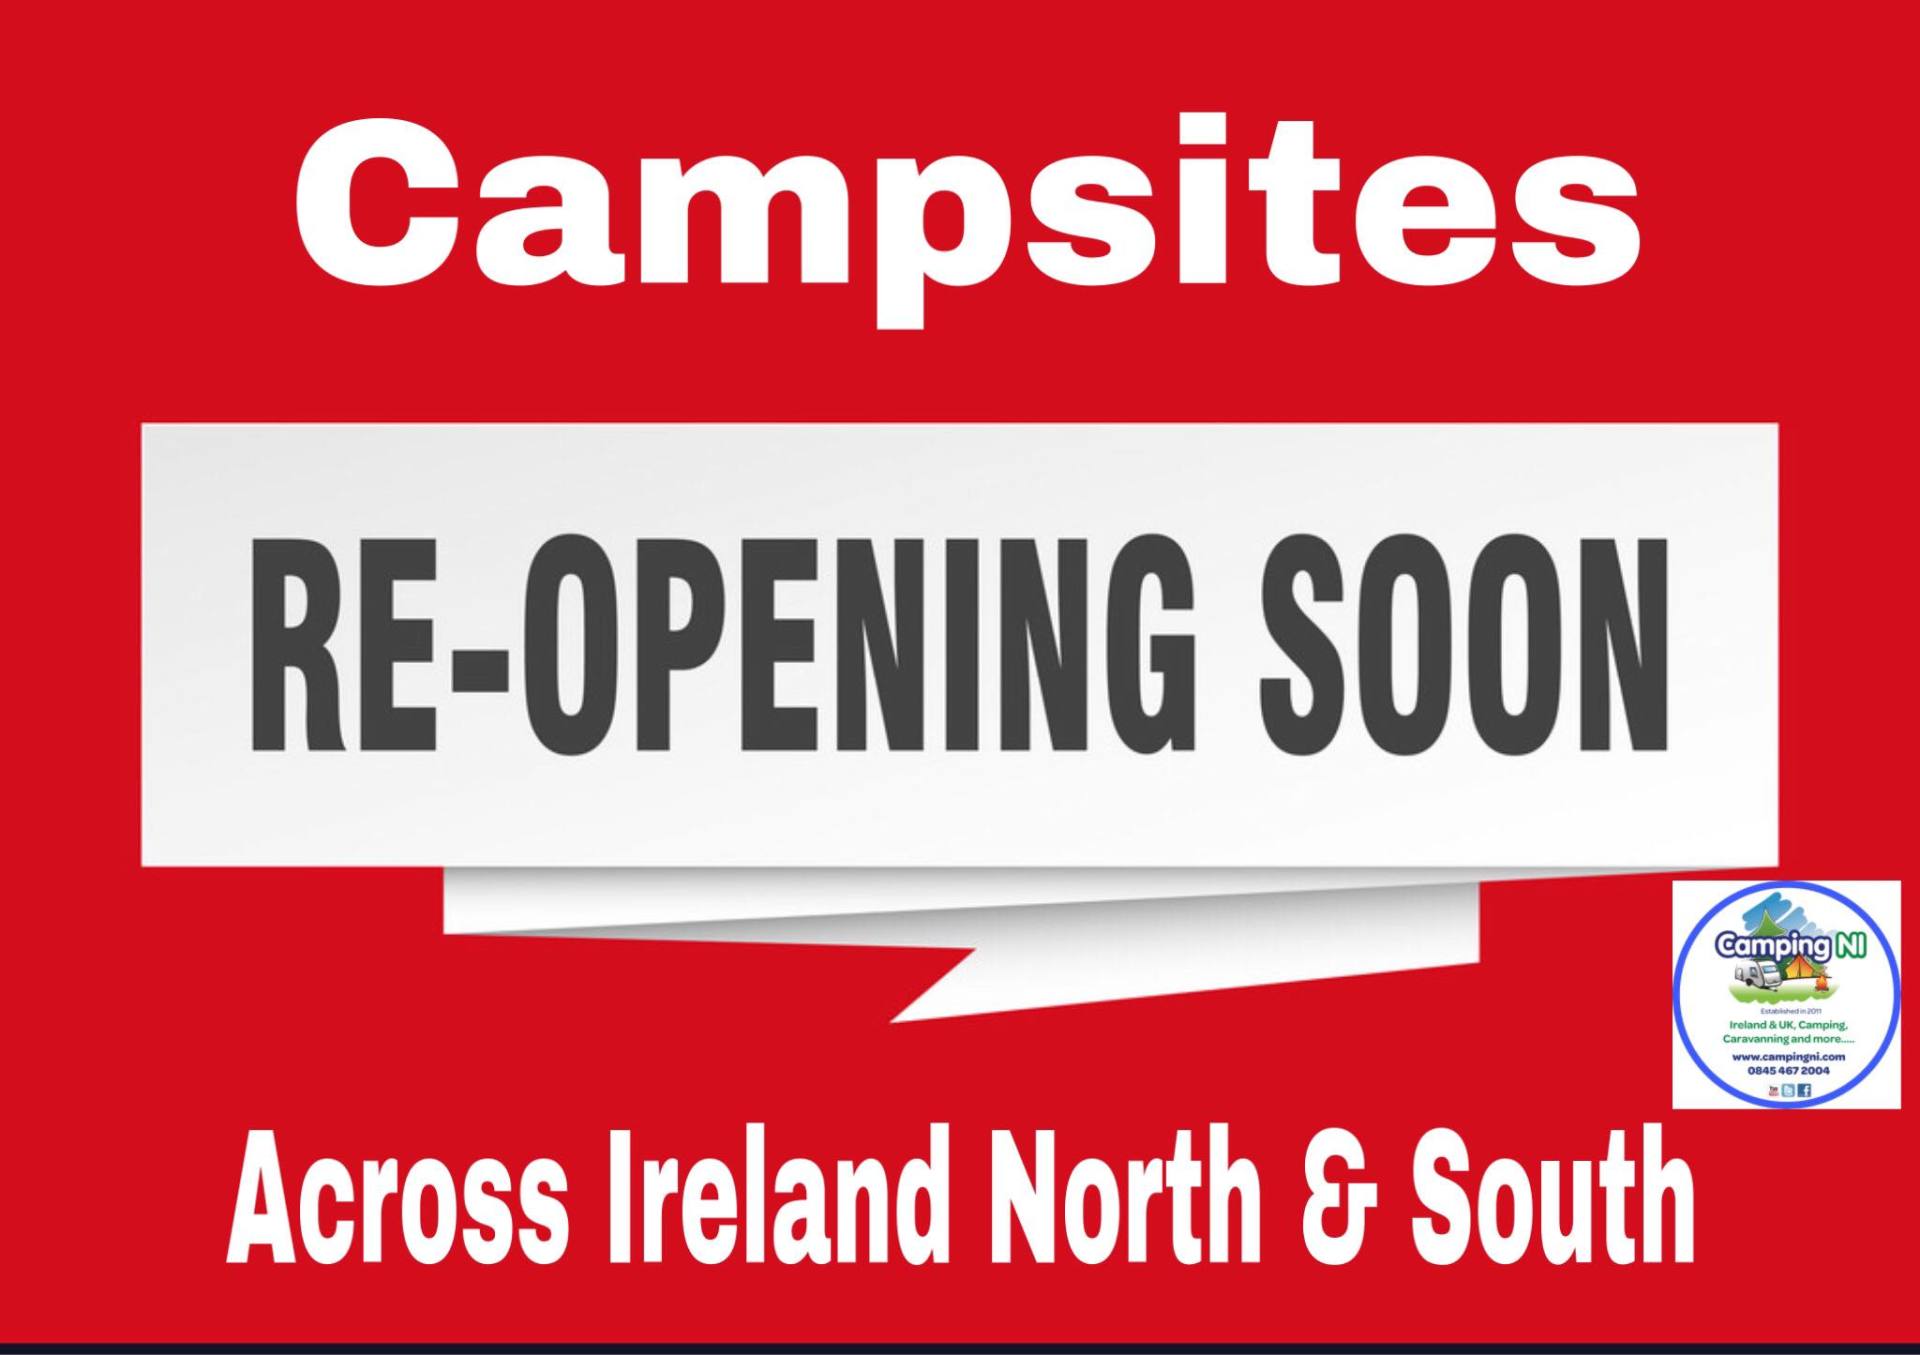 Campsite get ready to reopen CampingNI